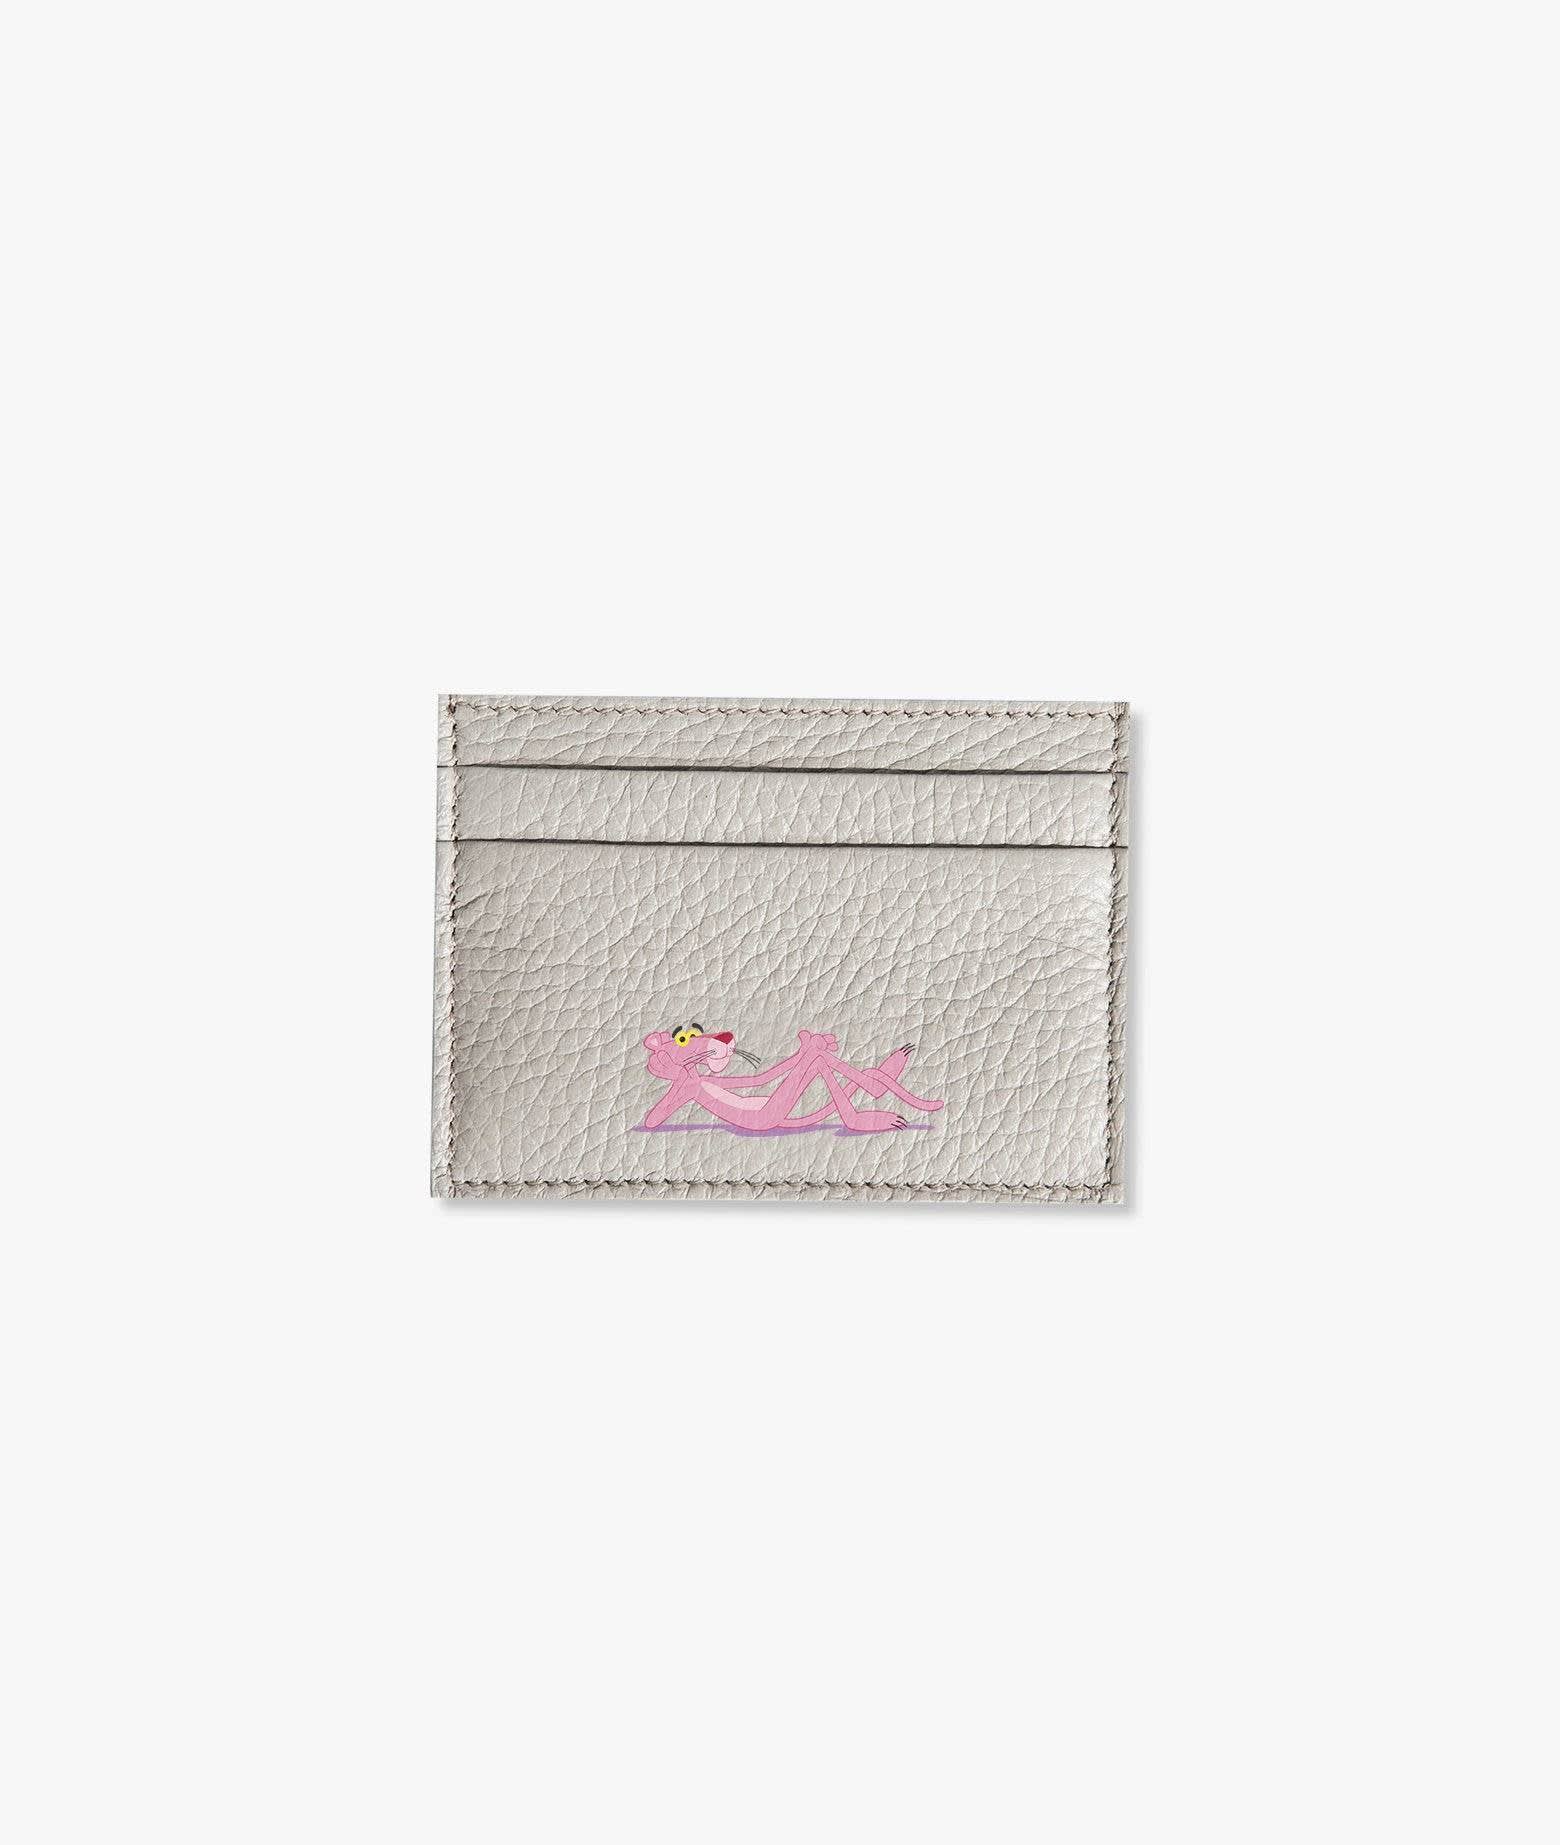 Larusmiani Card Holder Pink Panther Wallet In Lightgray